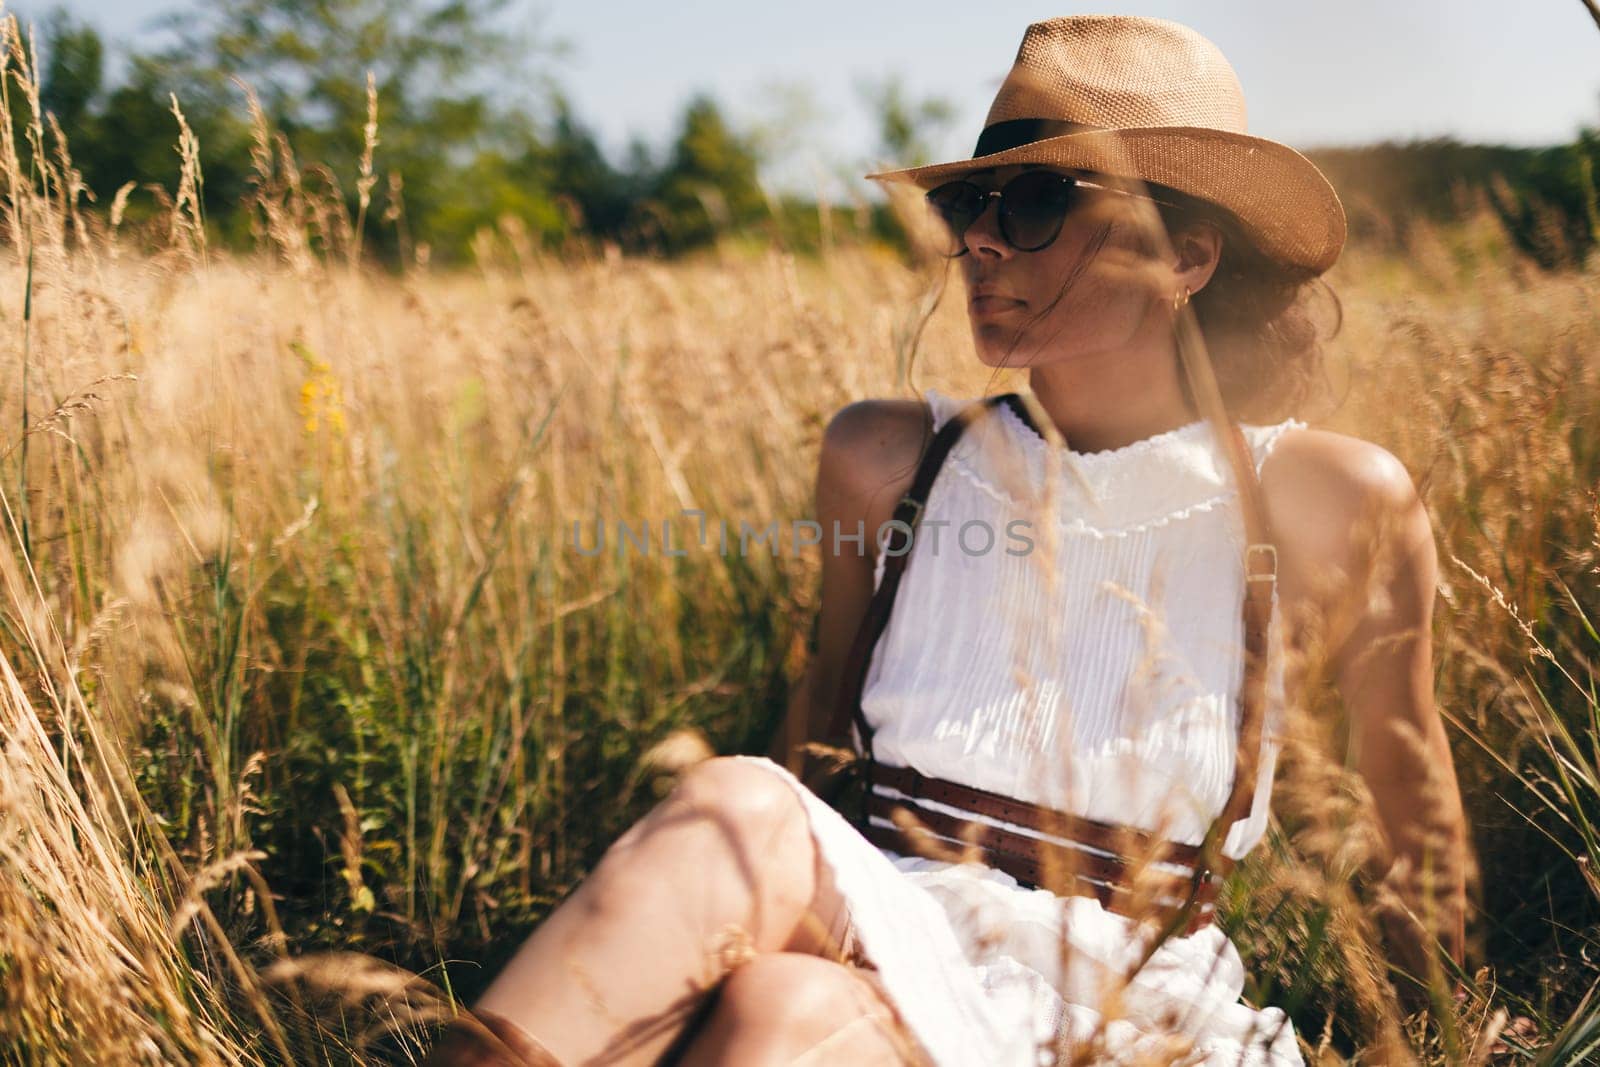 Spirit of freedom. An attractive boho girl in blouse, hat and sunglasses standing on the field on the background of a blue sky. Summer vacation, traveling. Bohemian, modern hippie style